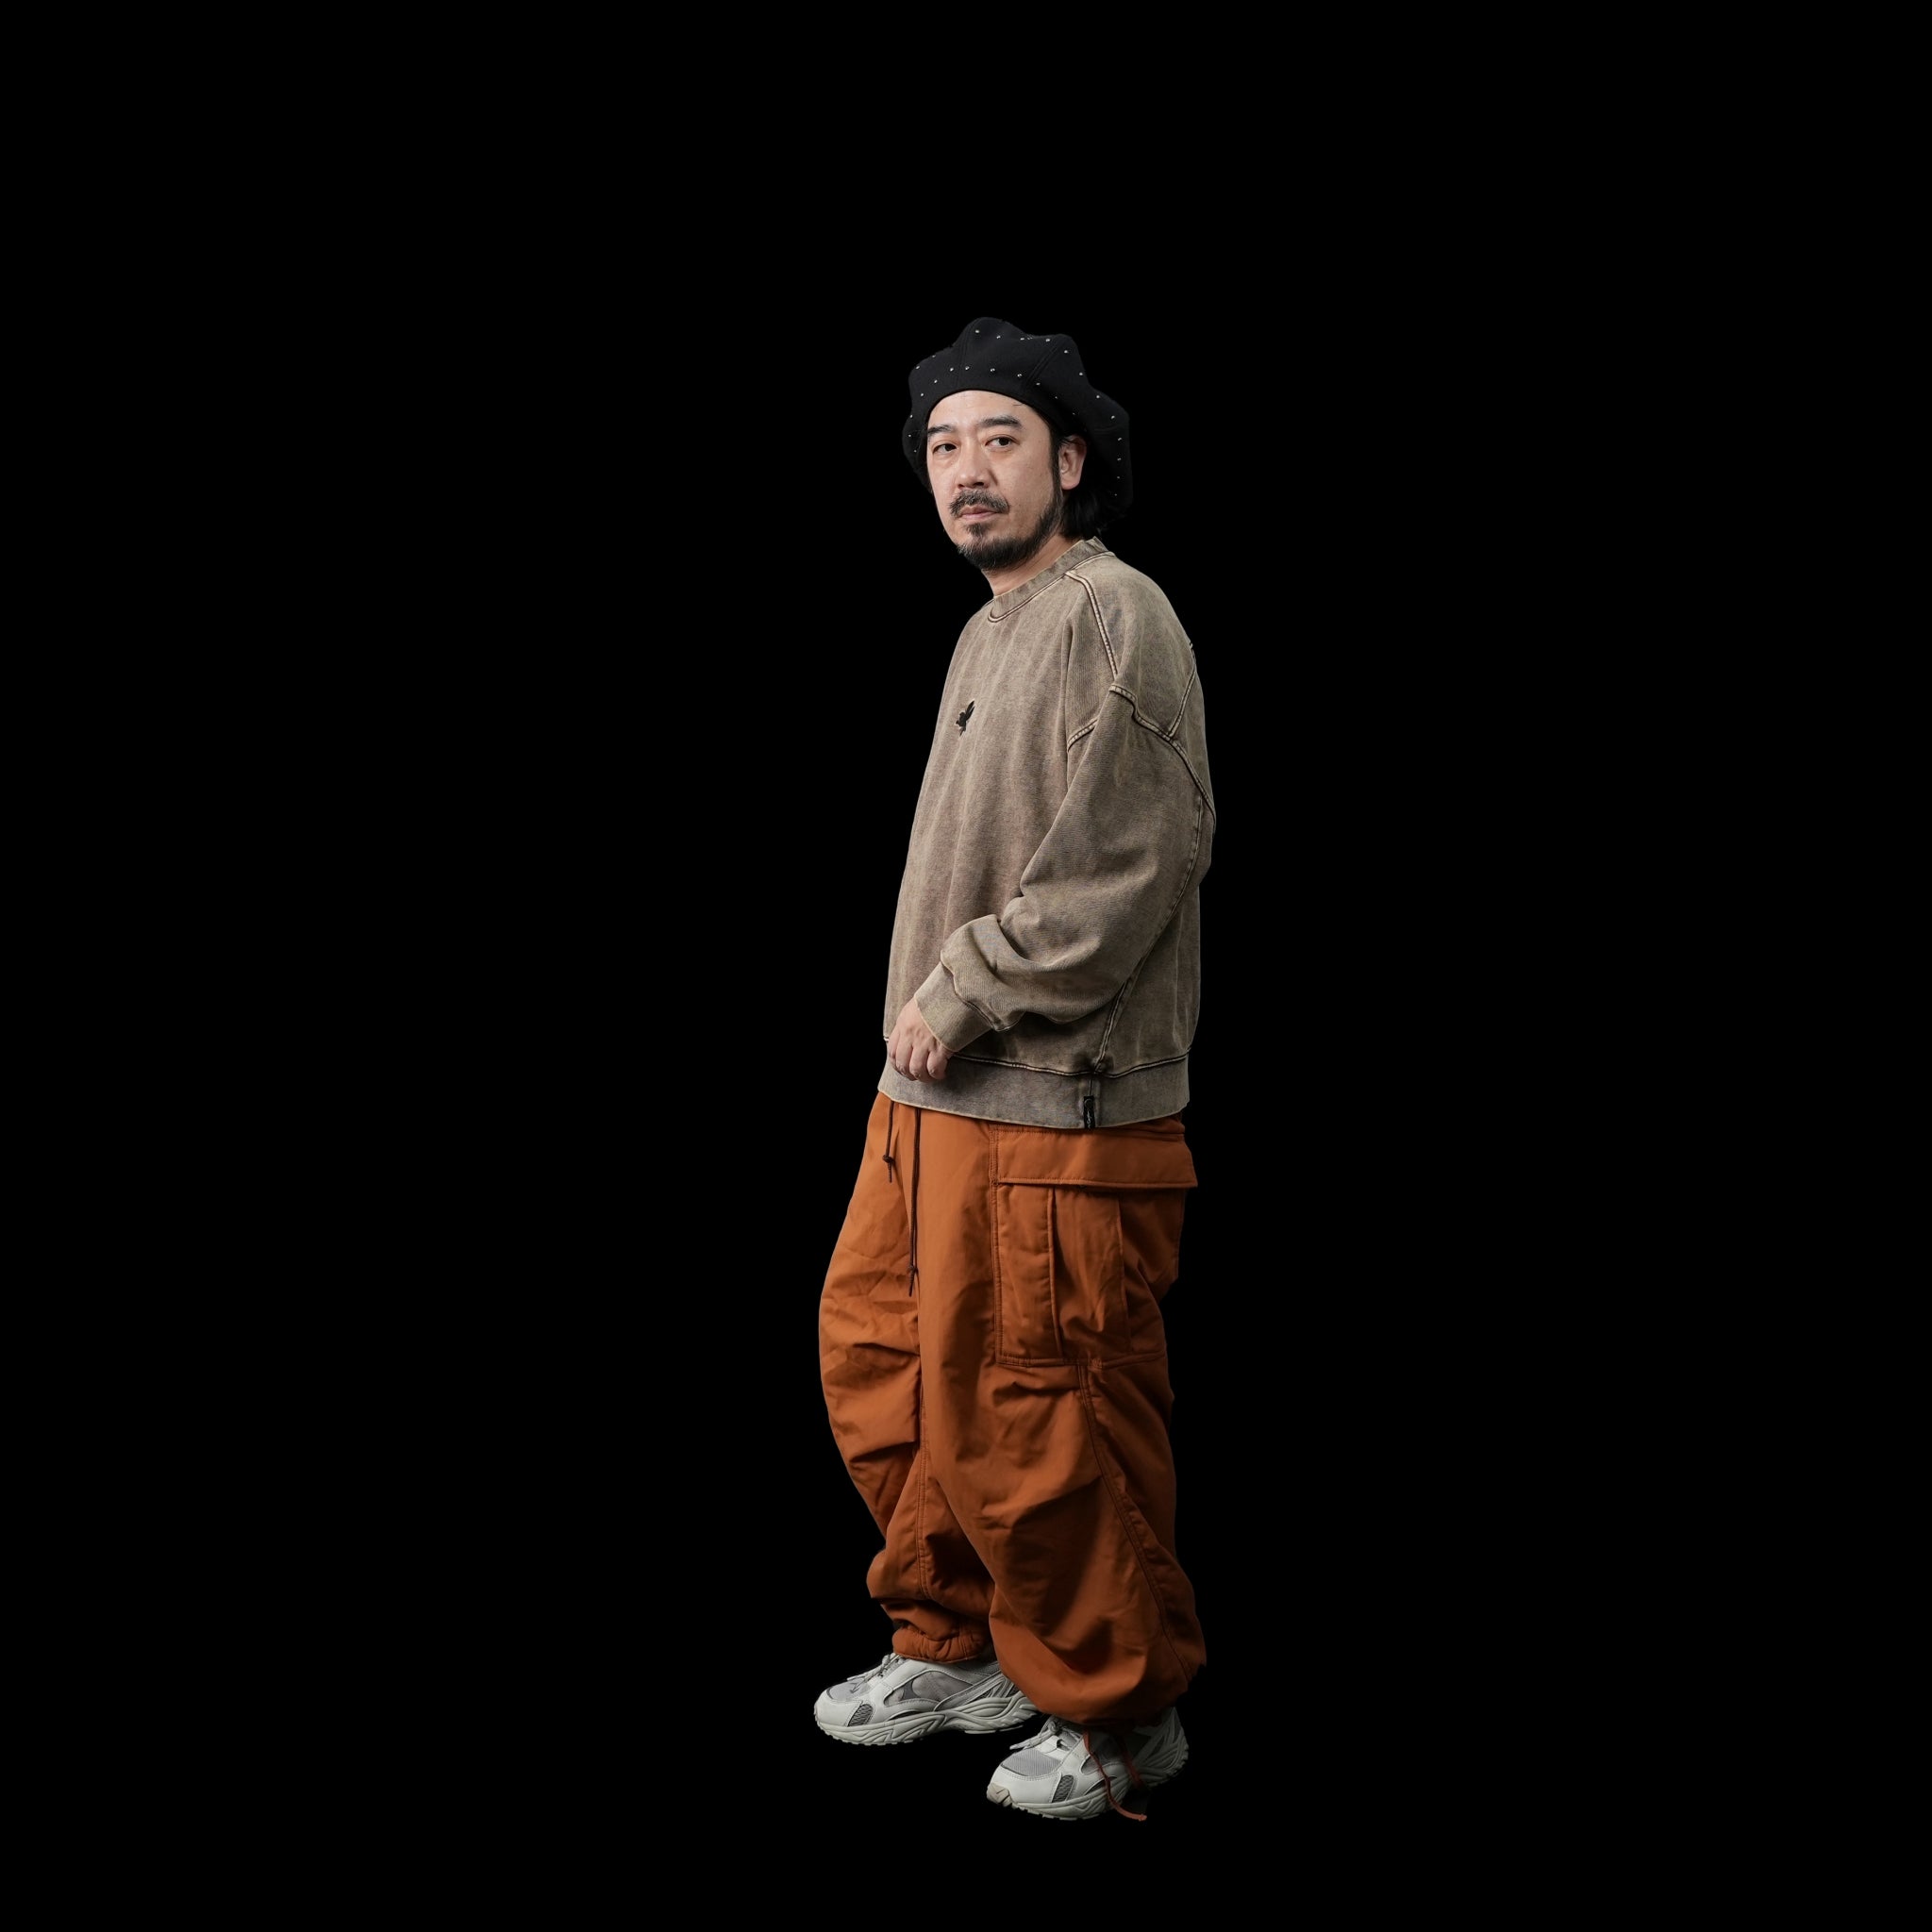 No:AM-2355005 | Name:Nylon Duck Cargo Pants | Color:Brown/Black【ARMYTWILL_アーミーツイル】